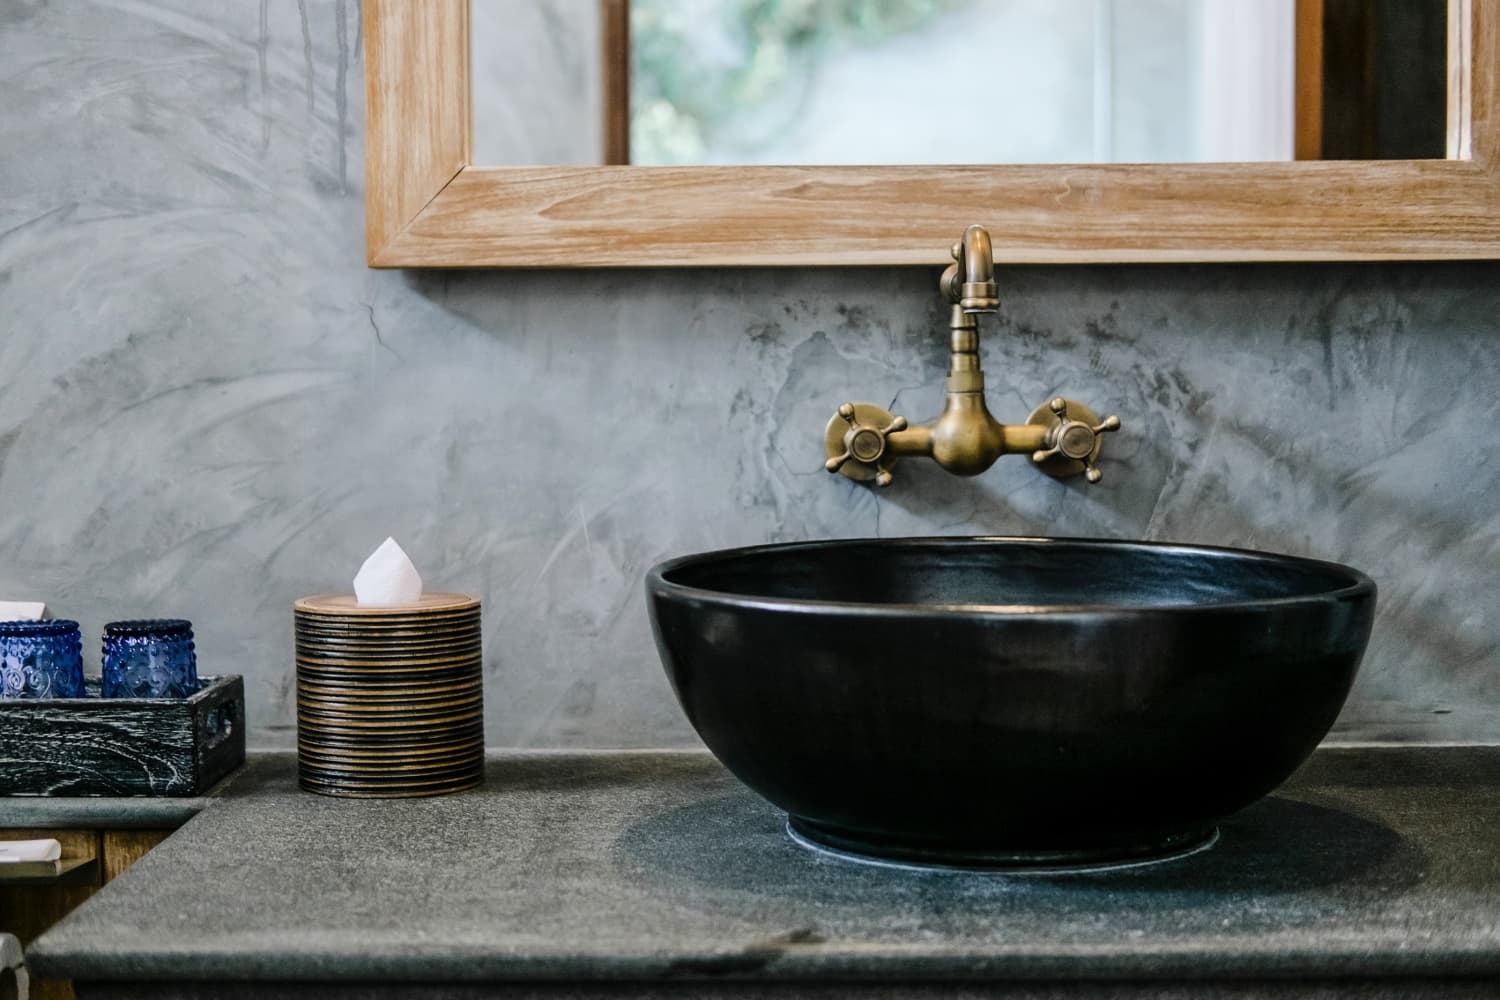 Why You Shouldn’t Get a Black Sink, According to TikTok